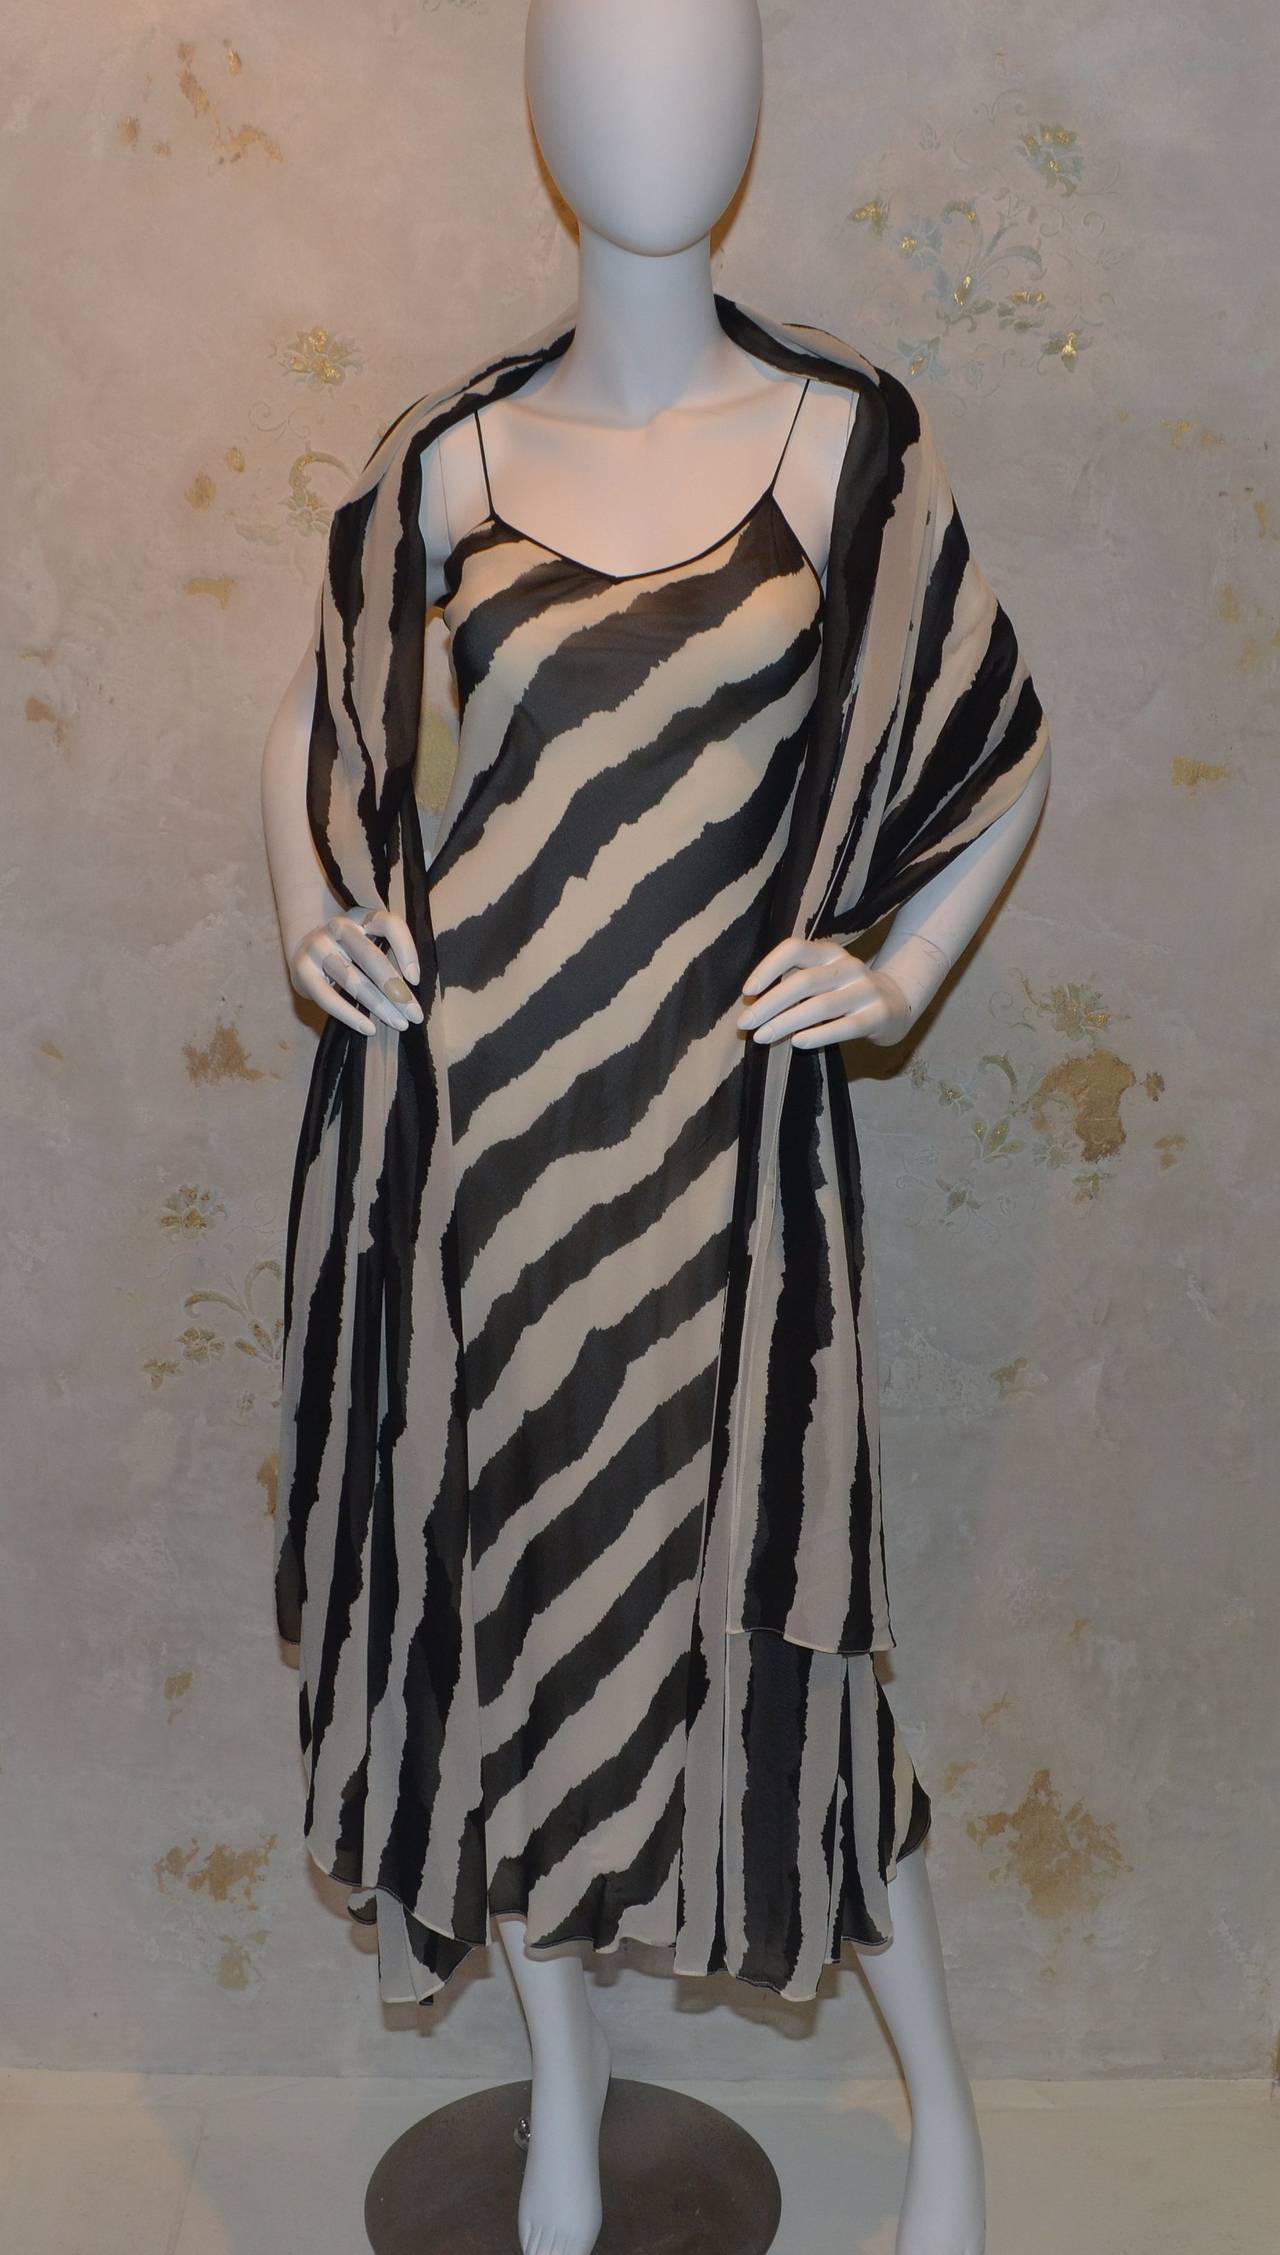 Bruce Oldfield London 1990s dress features a bias cut chiffon fabric throughout and is fully lined. Shawl is large and measures approximately 100 inches long and 52 inches wide.

Measurements:
Bust - 27''
Waist - 26''
Hips - 32''
Length - 49''